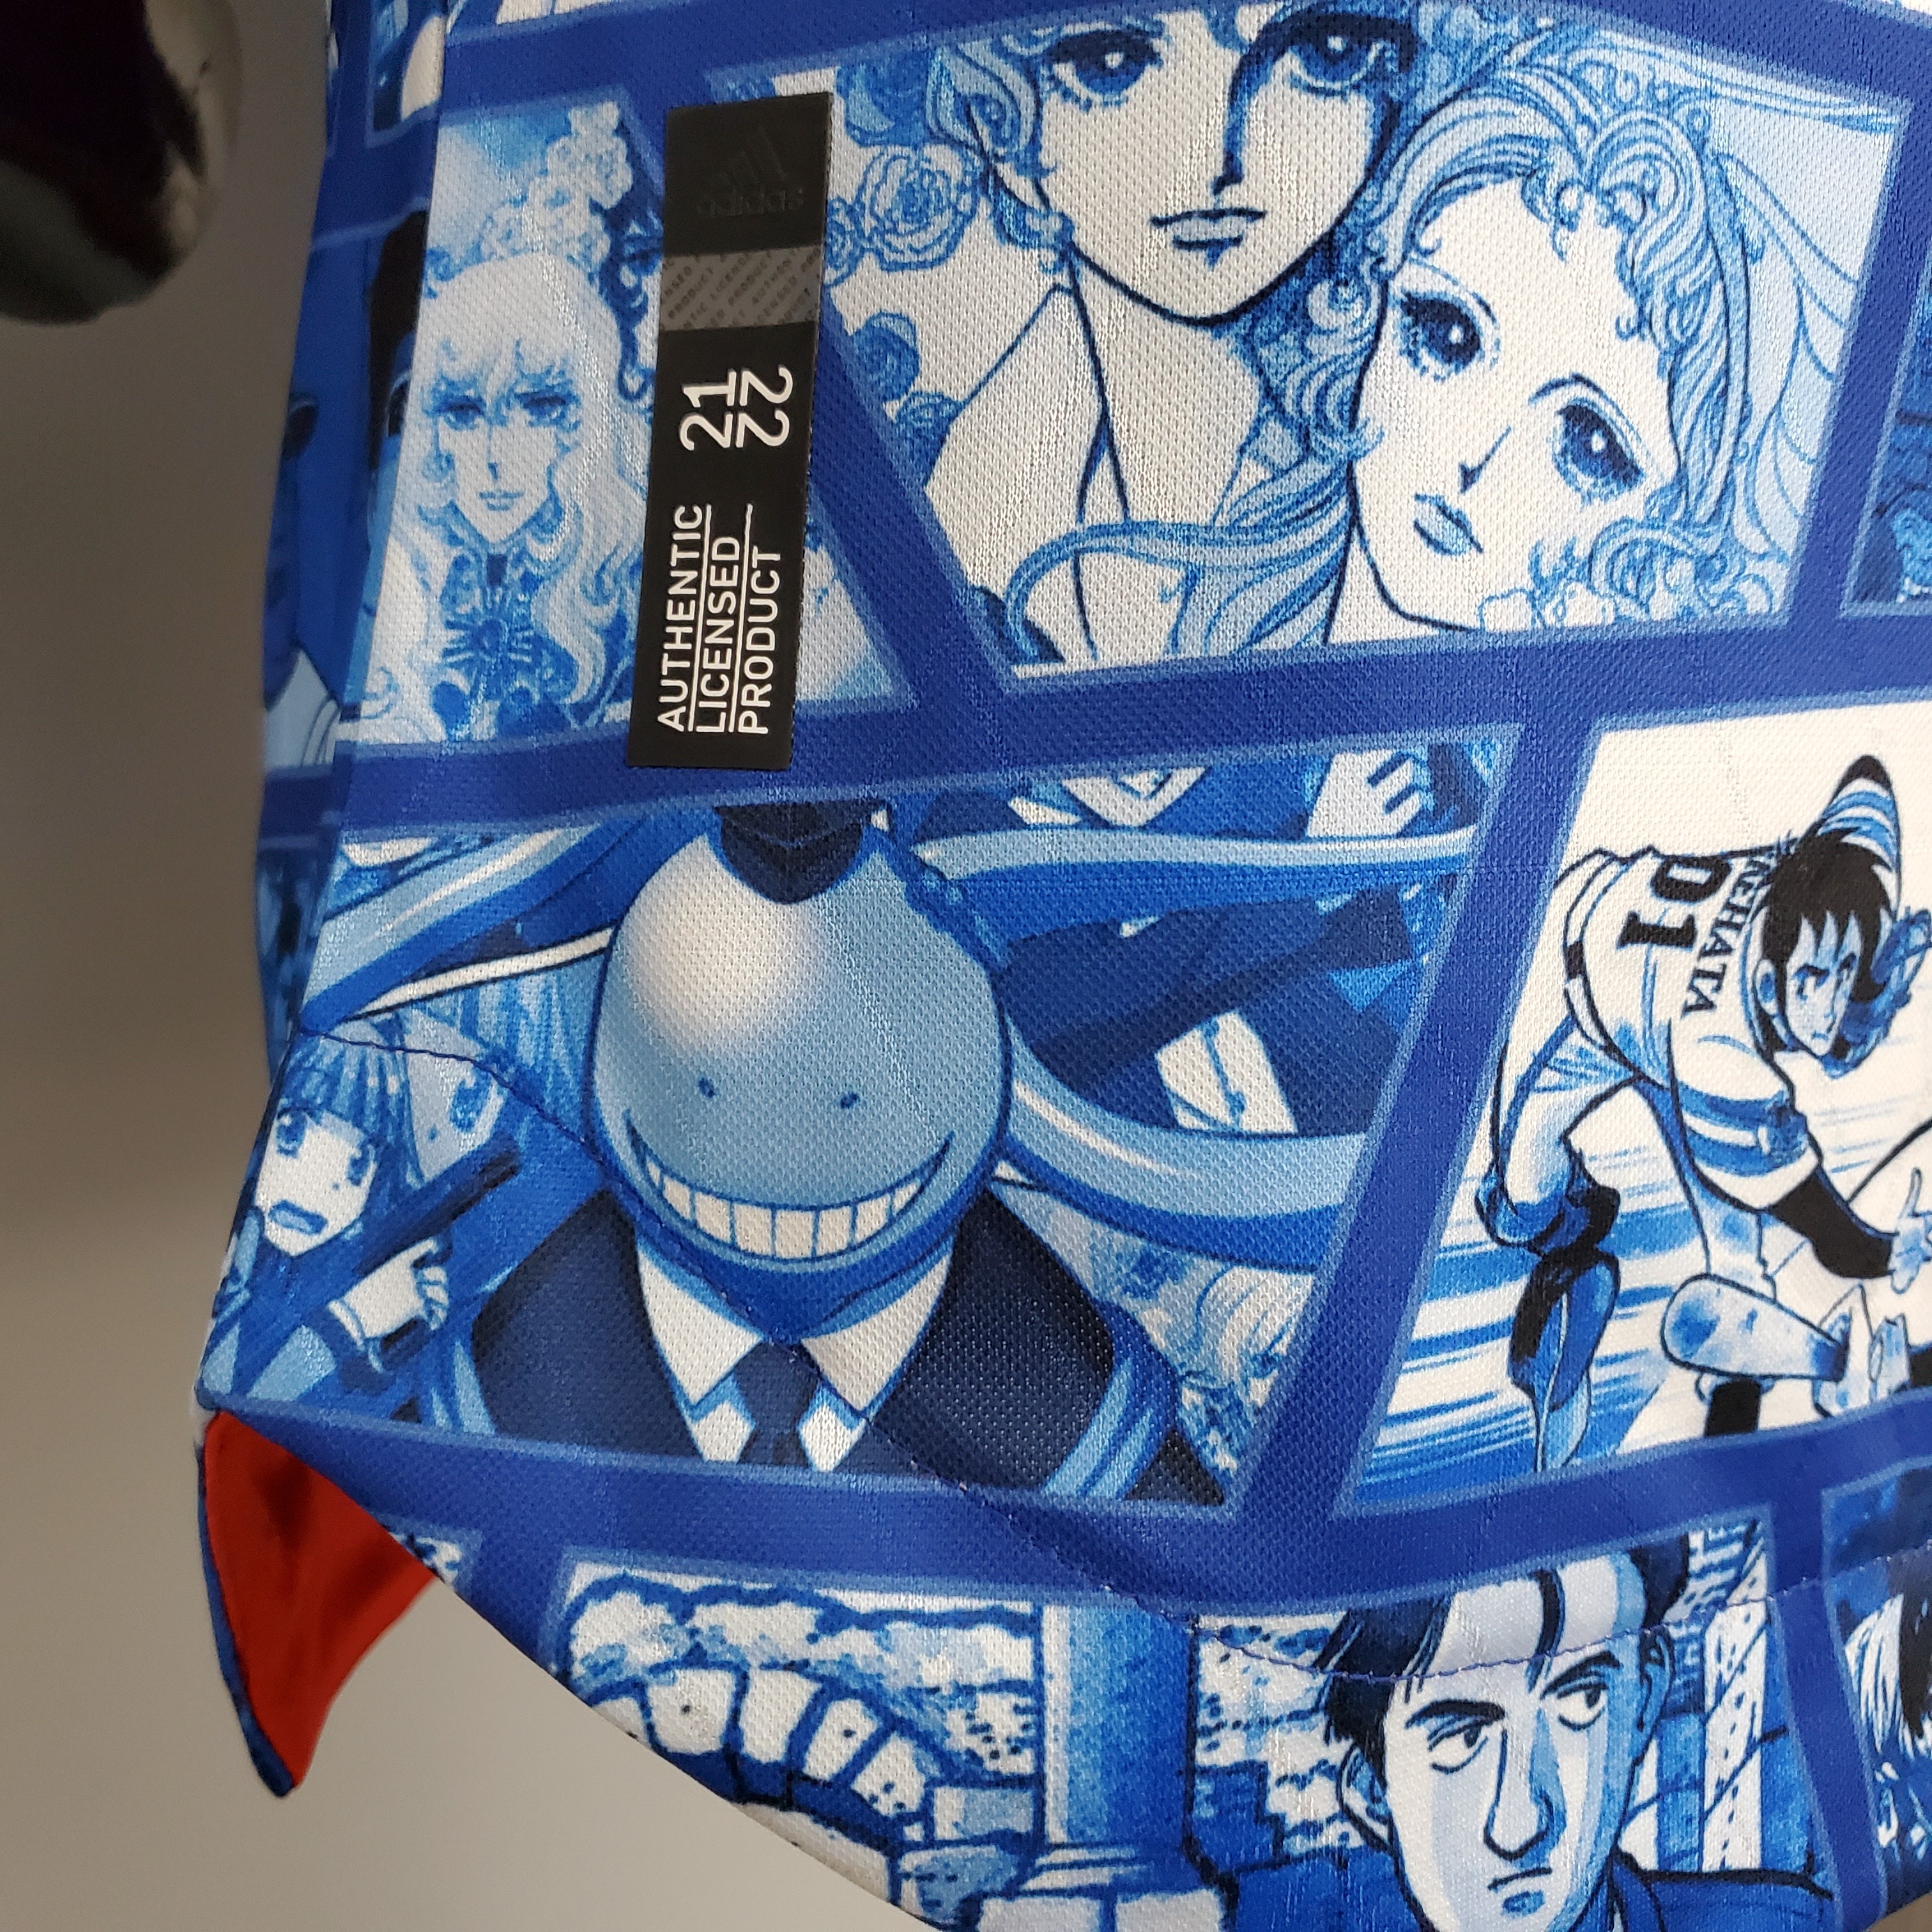 Which Anime Has Influenced The Japanese Team Jersey For FIFA World Cup 2022  - FirstCuriosity